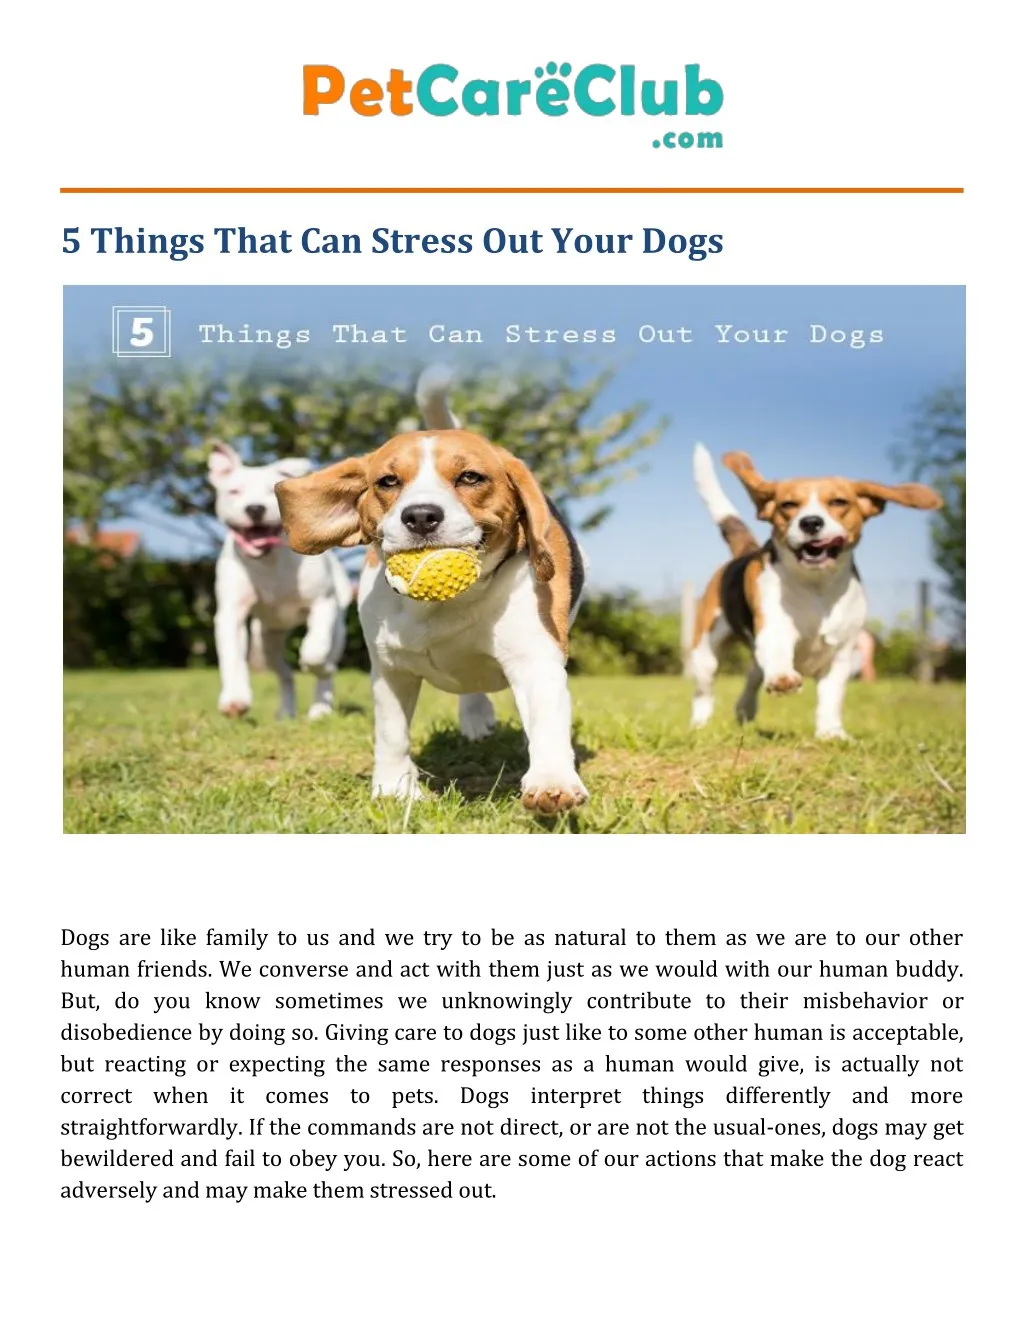 5 things that can stress out your dogs